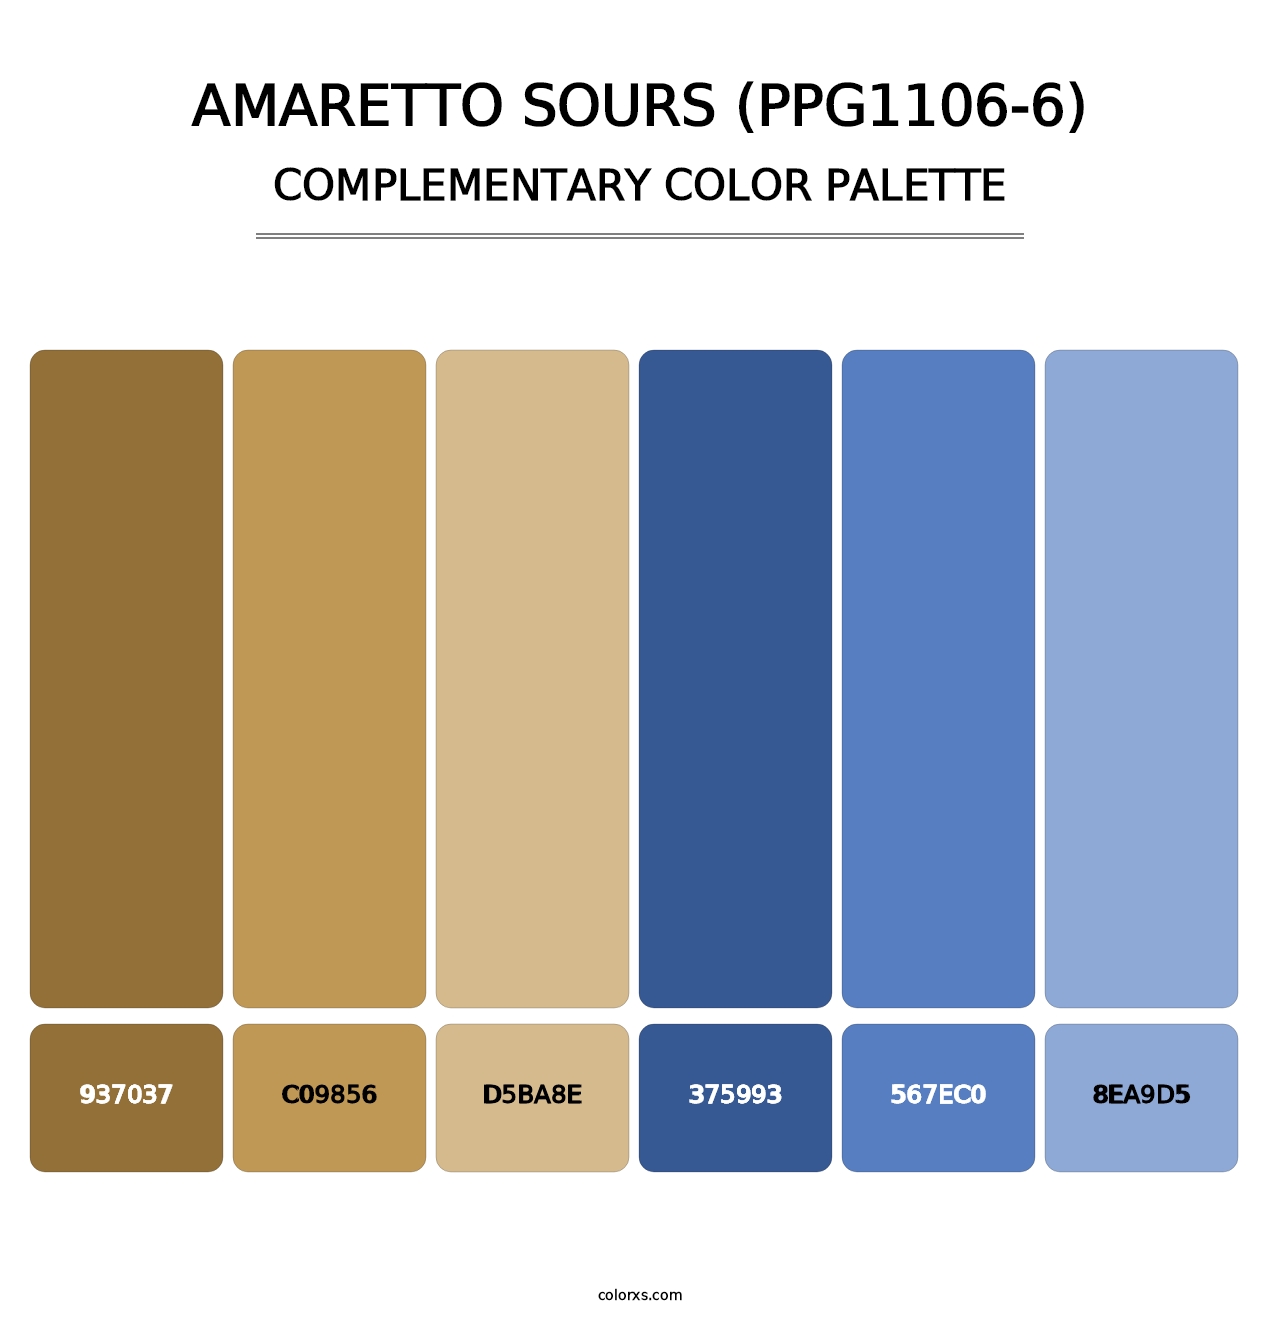 Amaretto Sours (PPG1106-6) - Complementary Color Palette